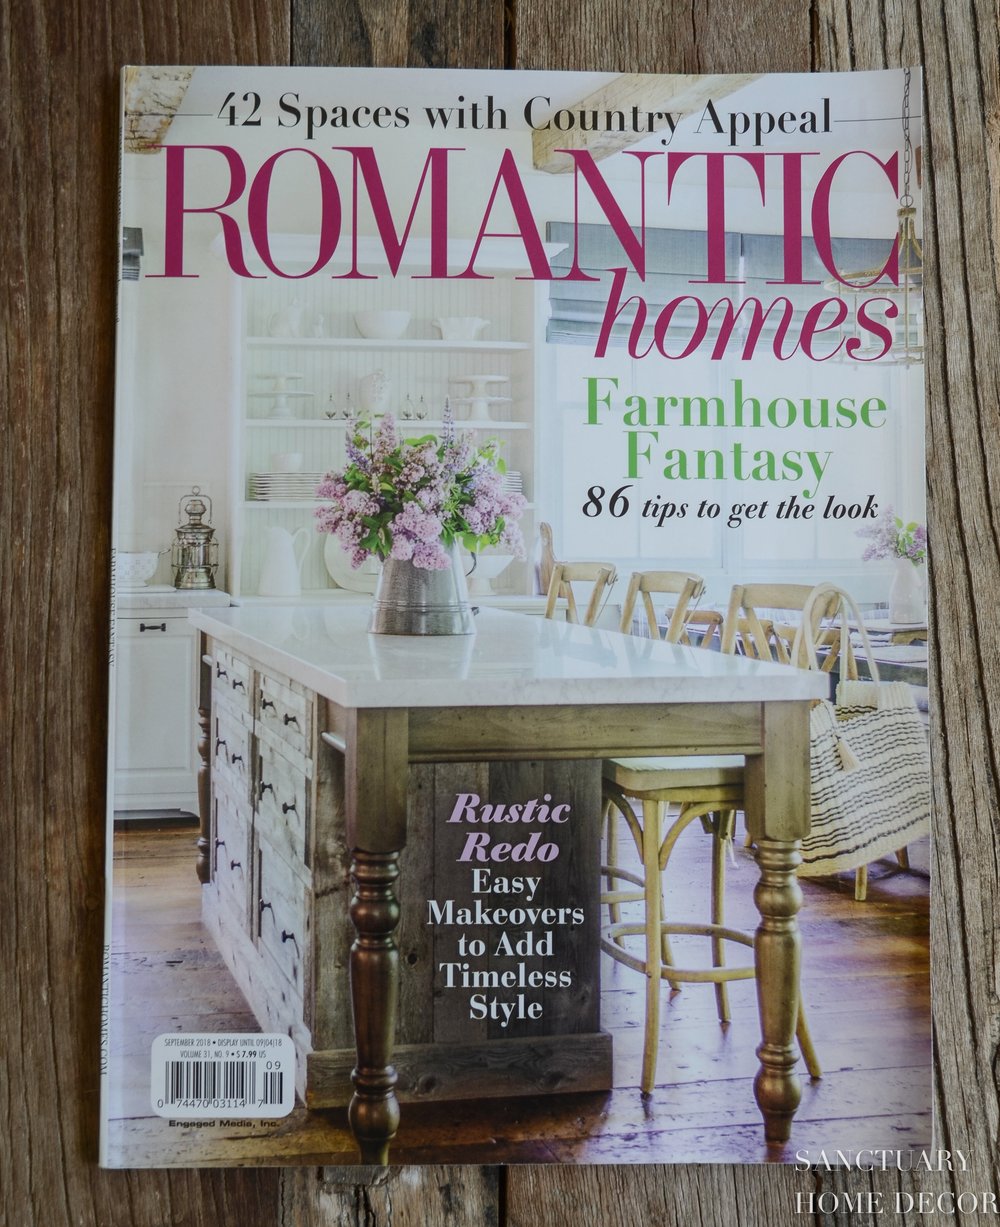 Our House In Romantic Homes Magazine Sanctuary Home Decor